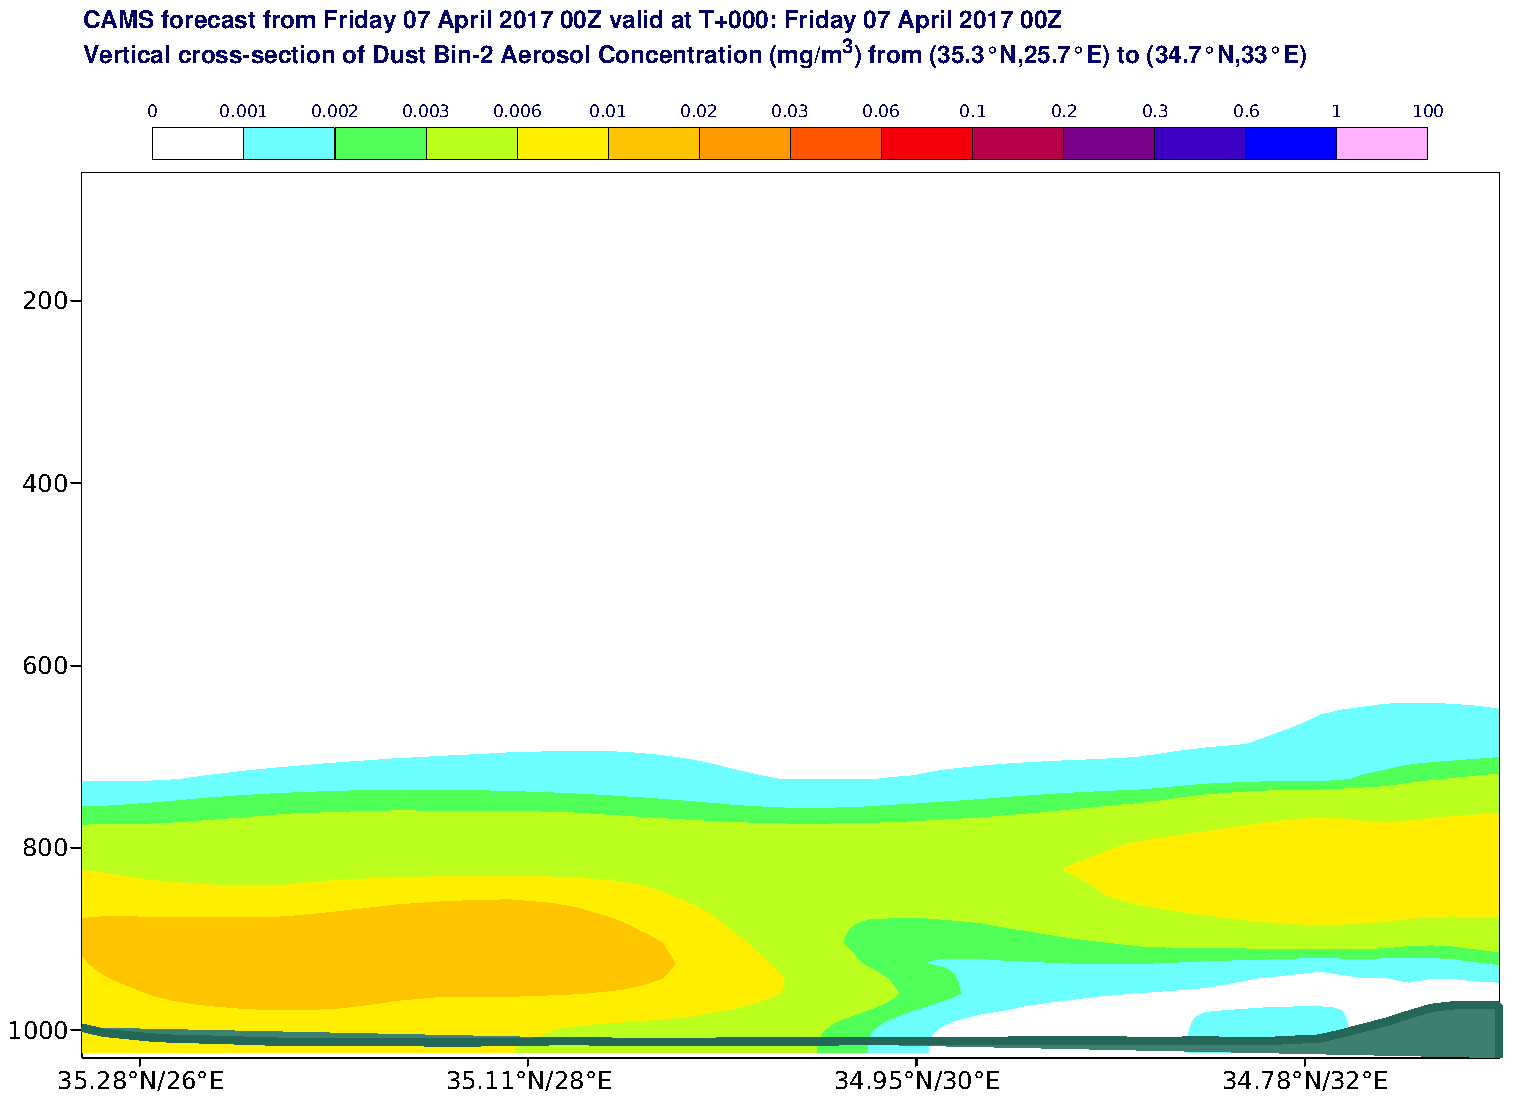 Vertical cross-section of Dust Bin-2 Aerosol Concentration (mg/m3) valid at T0 - 2017-04-07 00:00